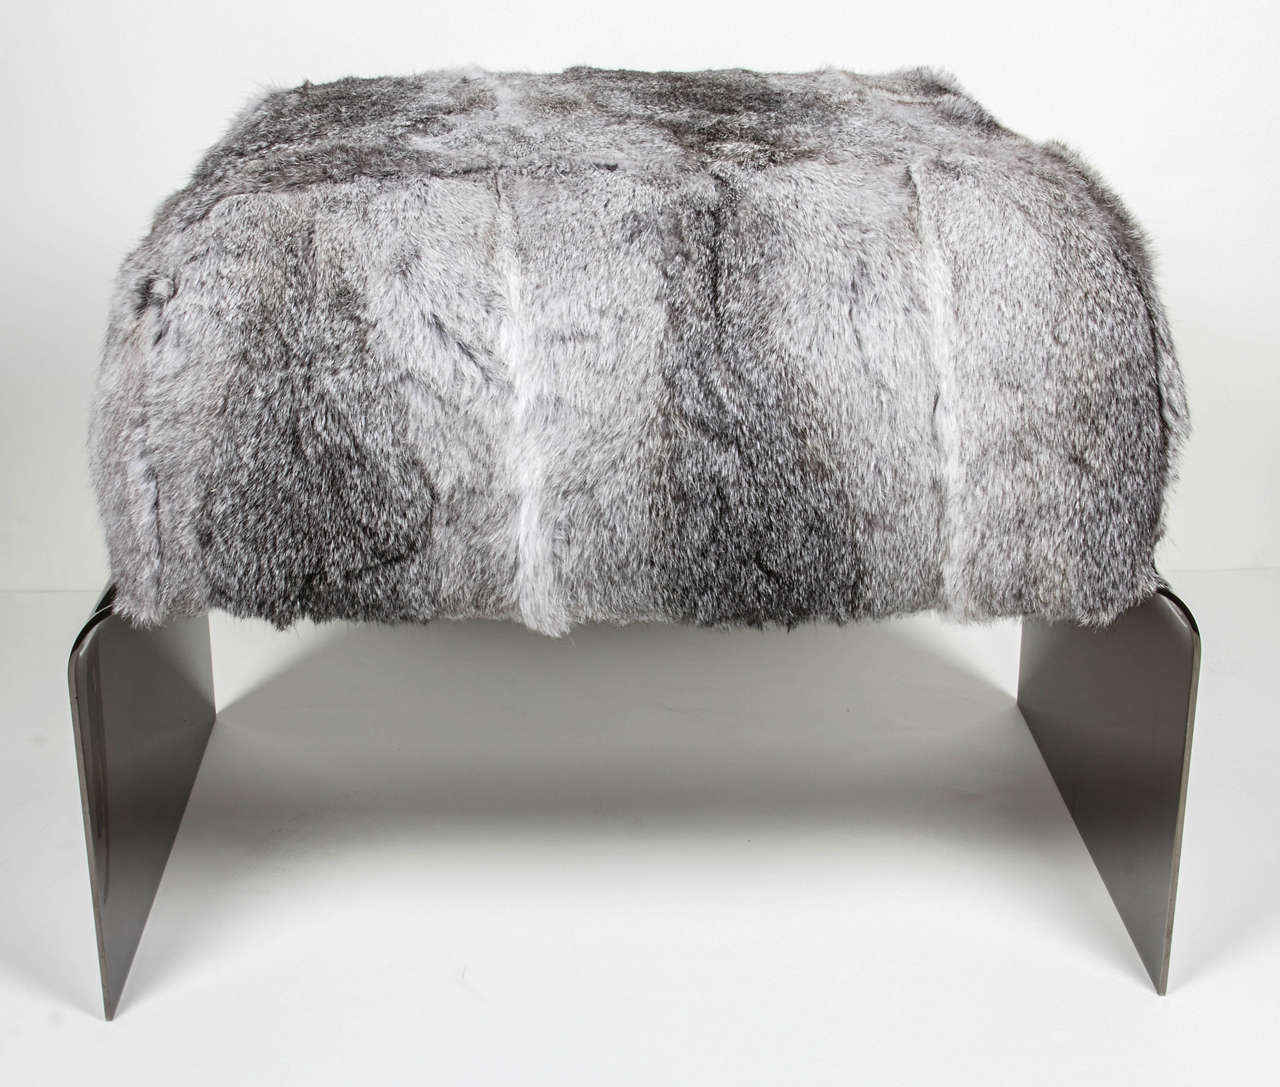 Contemporary ottoman or bench upholstered in luxurious rabbit fur in variant hues of grey. The bench has a waterfall steel frame with a black nickel finish which looks like gunmetal in color. Great accent piece for any room and great as an ottoman.